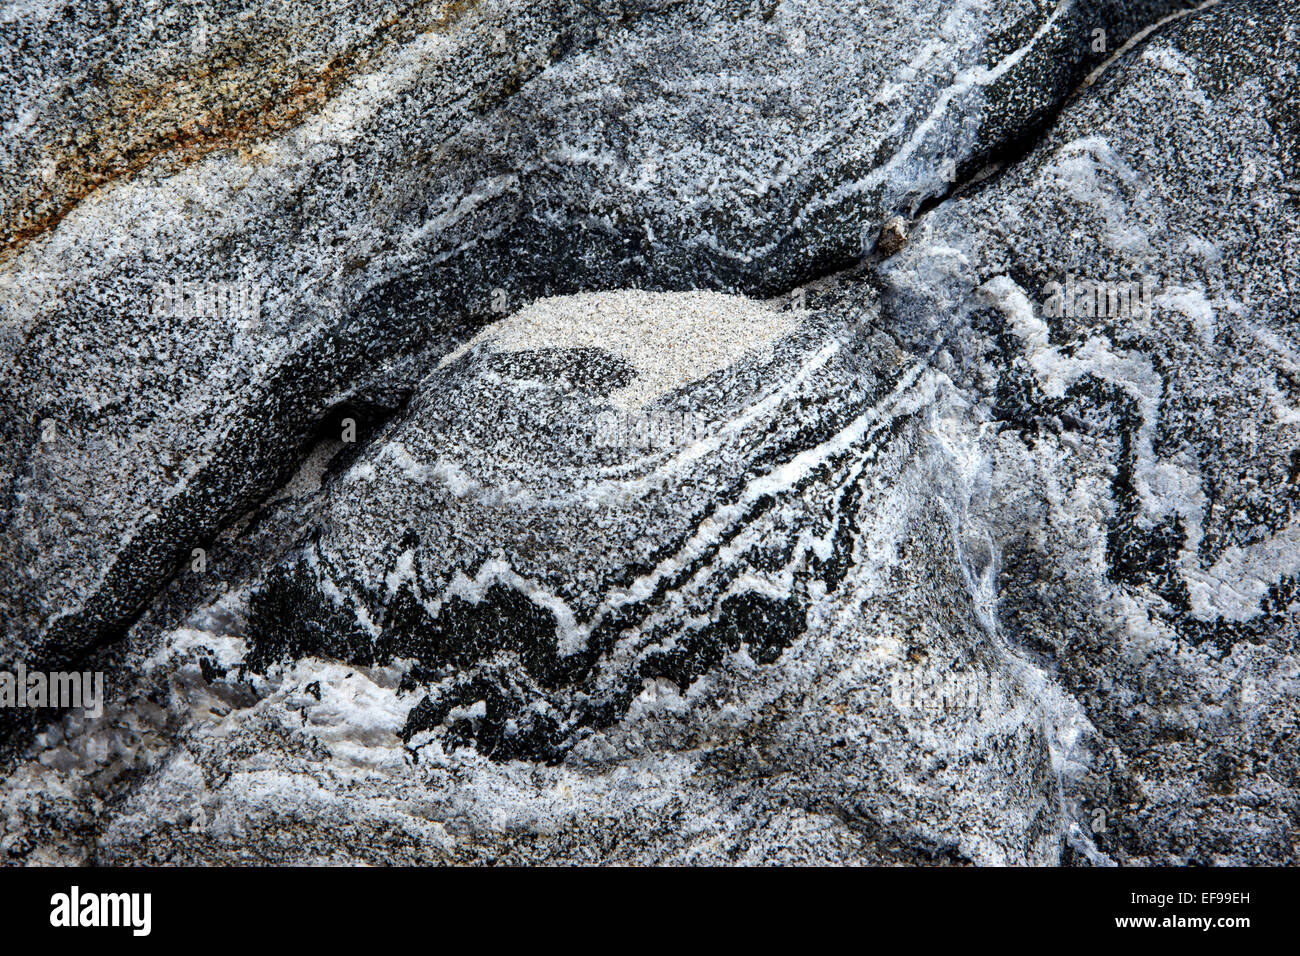 Detail of Lewisian Gneiss rocks on the Isle of Harris in the Outer Hebrides of Scotland Stock Photo